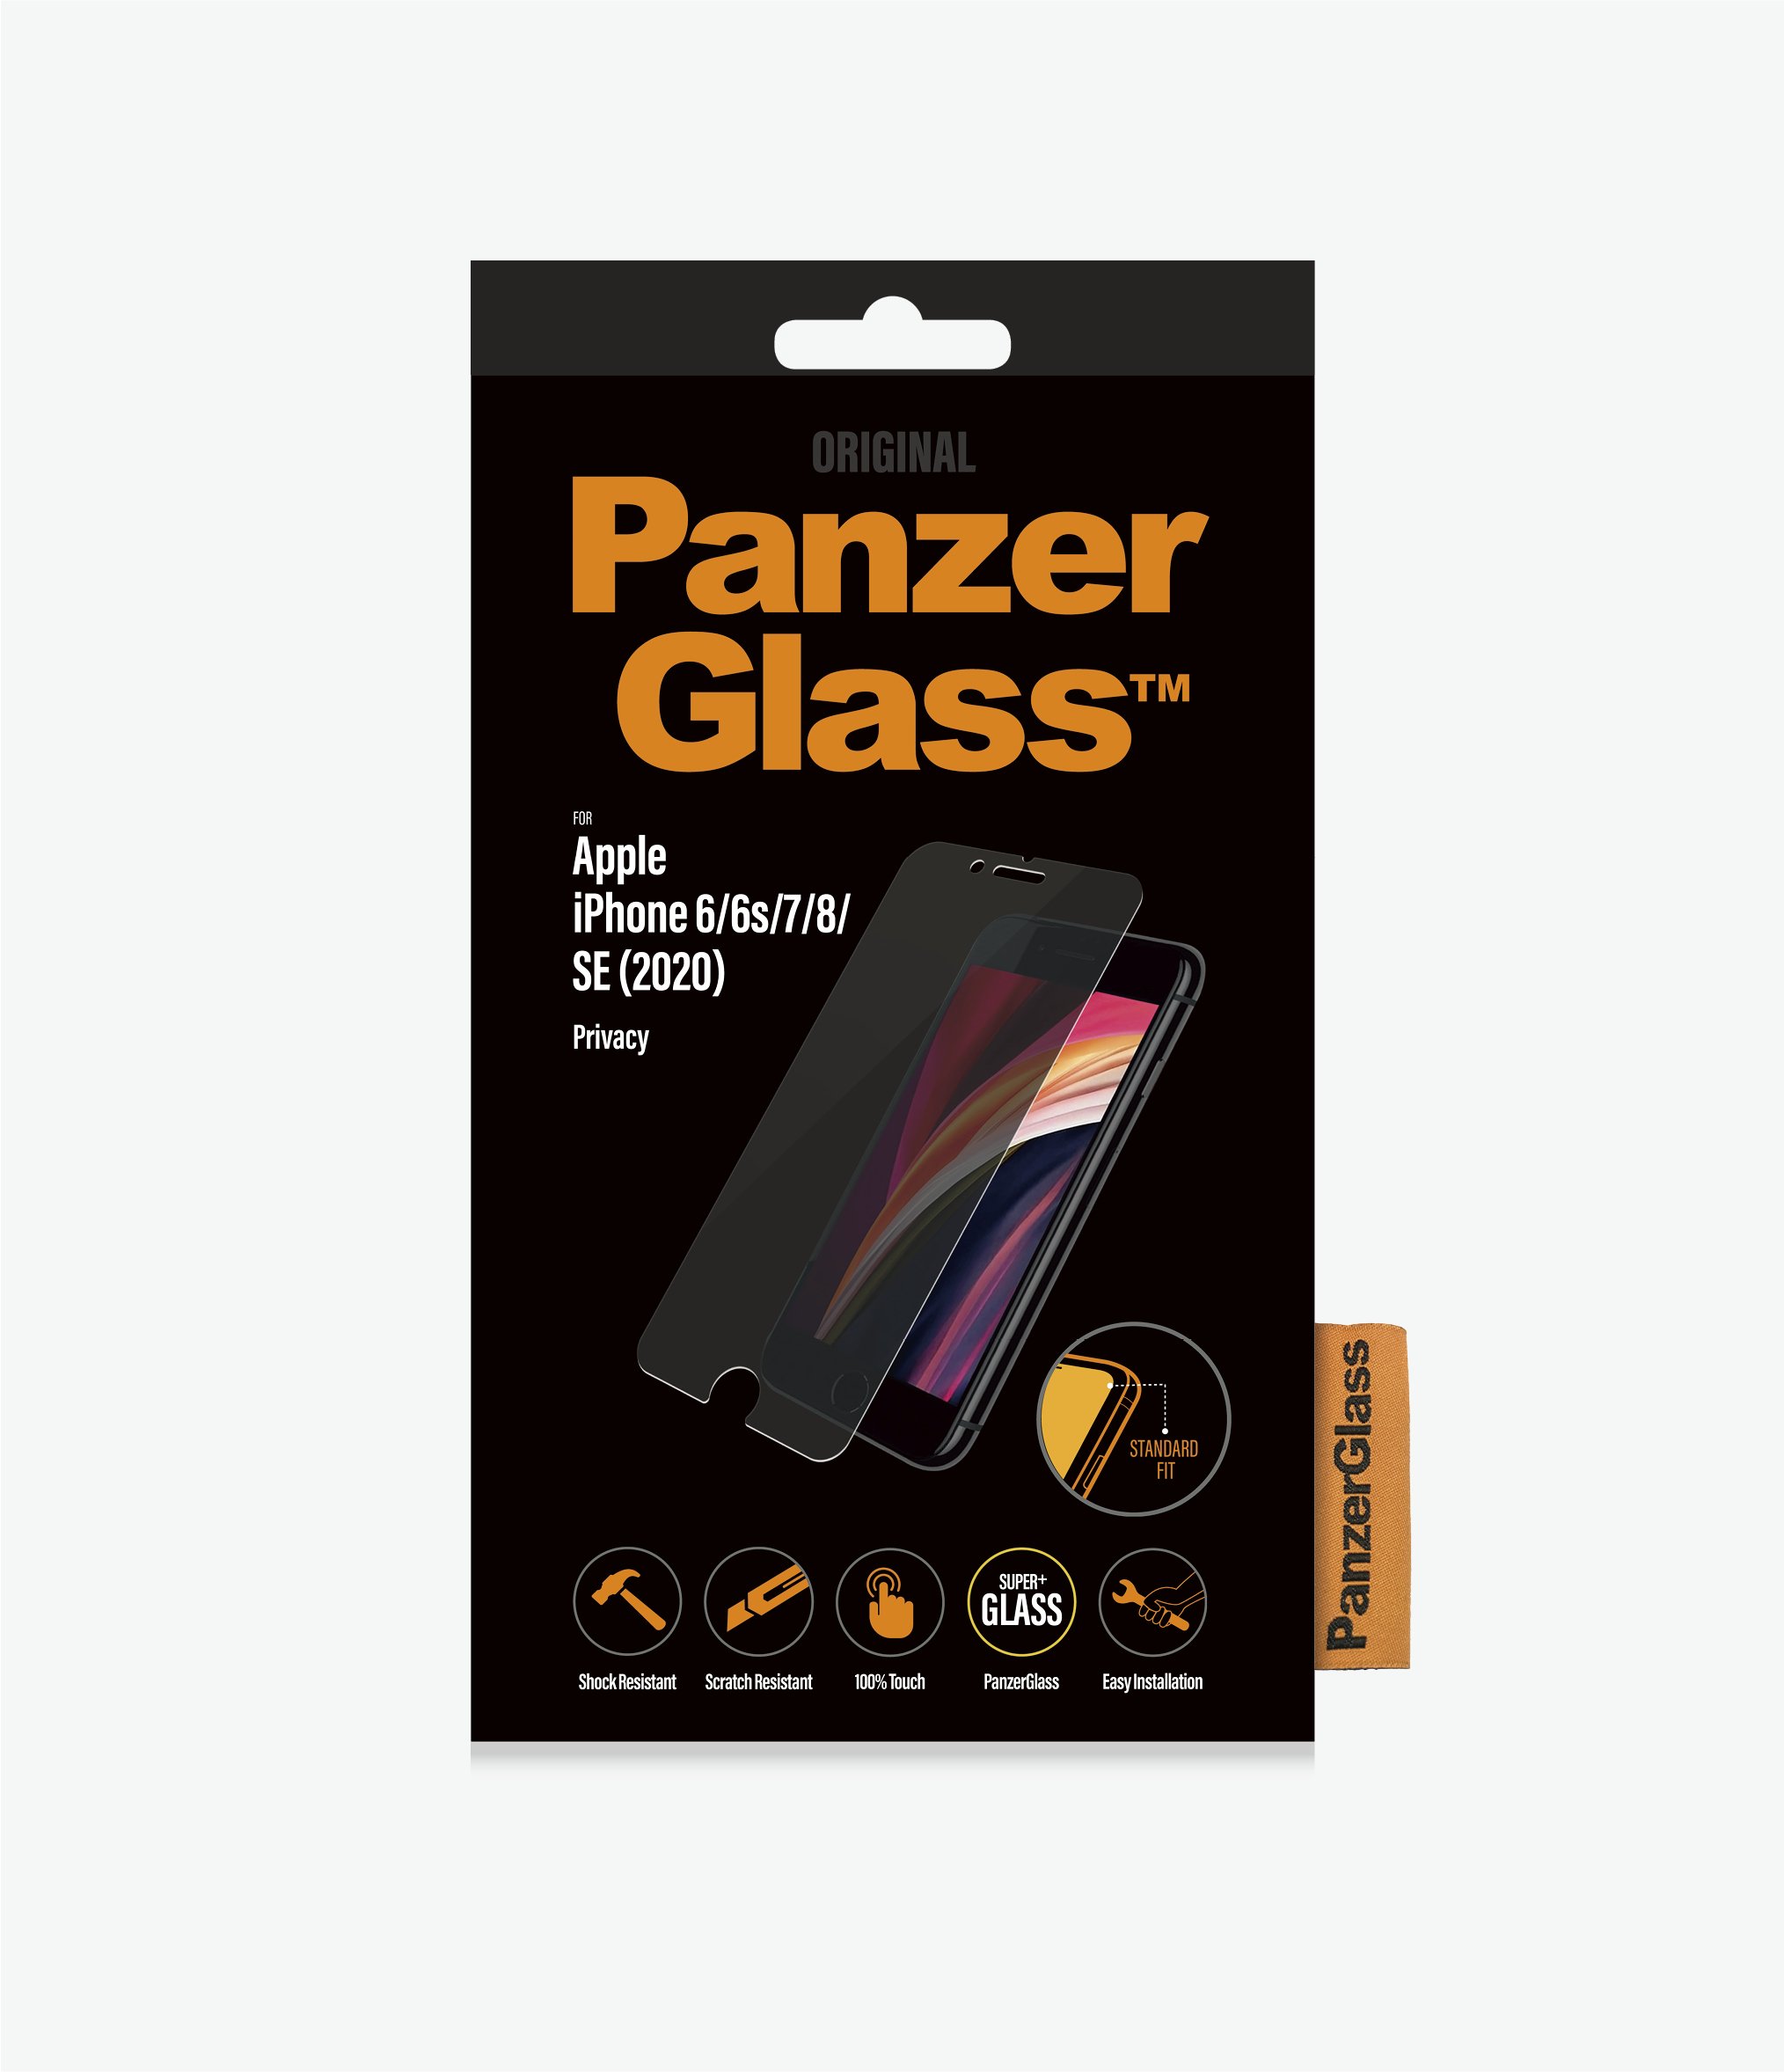 PanzerGlass™ Apple iPhone 6/6s/7/8/SE (2020) - Privacy (P2684) - Screen Protector - Full frame coverage, Rounded edges, Crystal clear, 100% touch